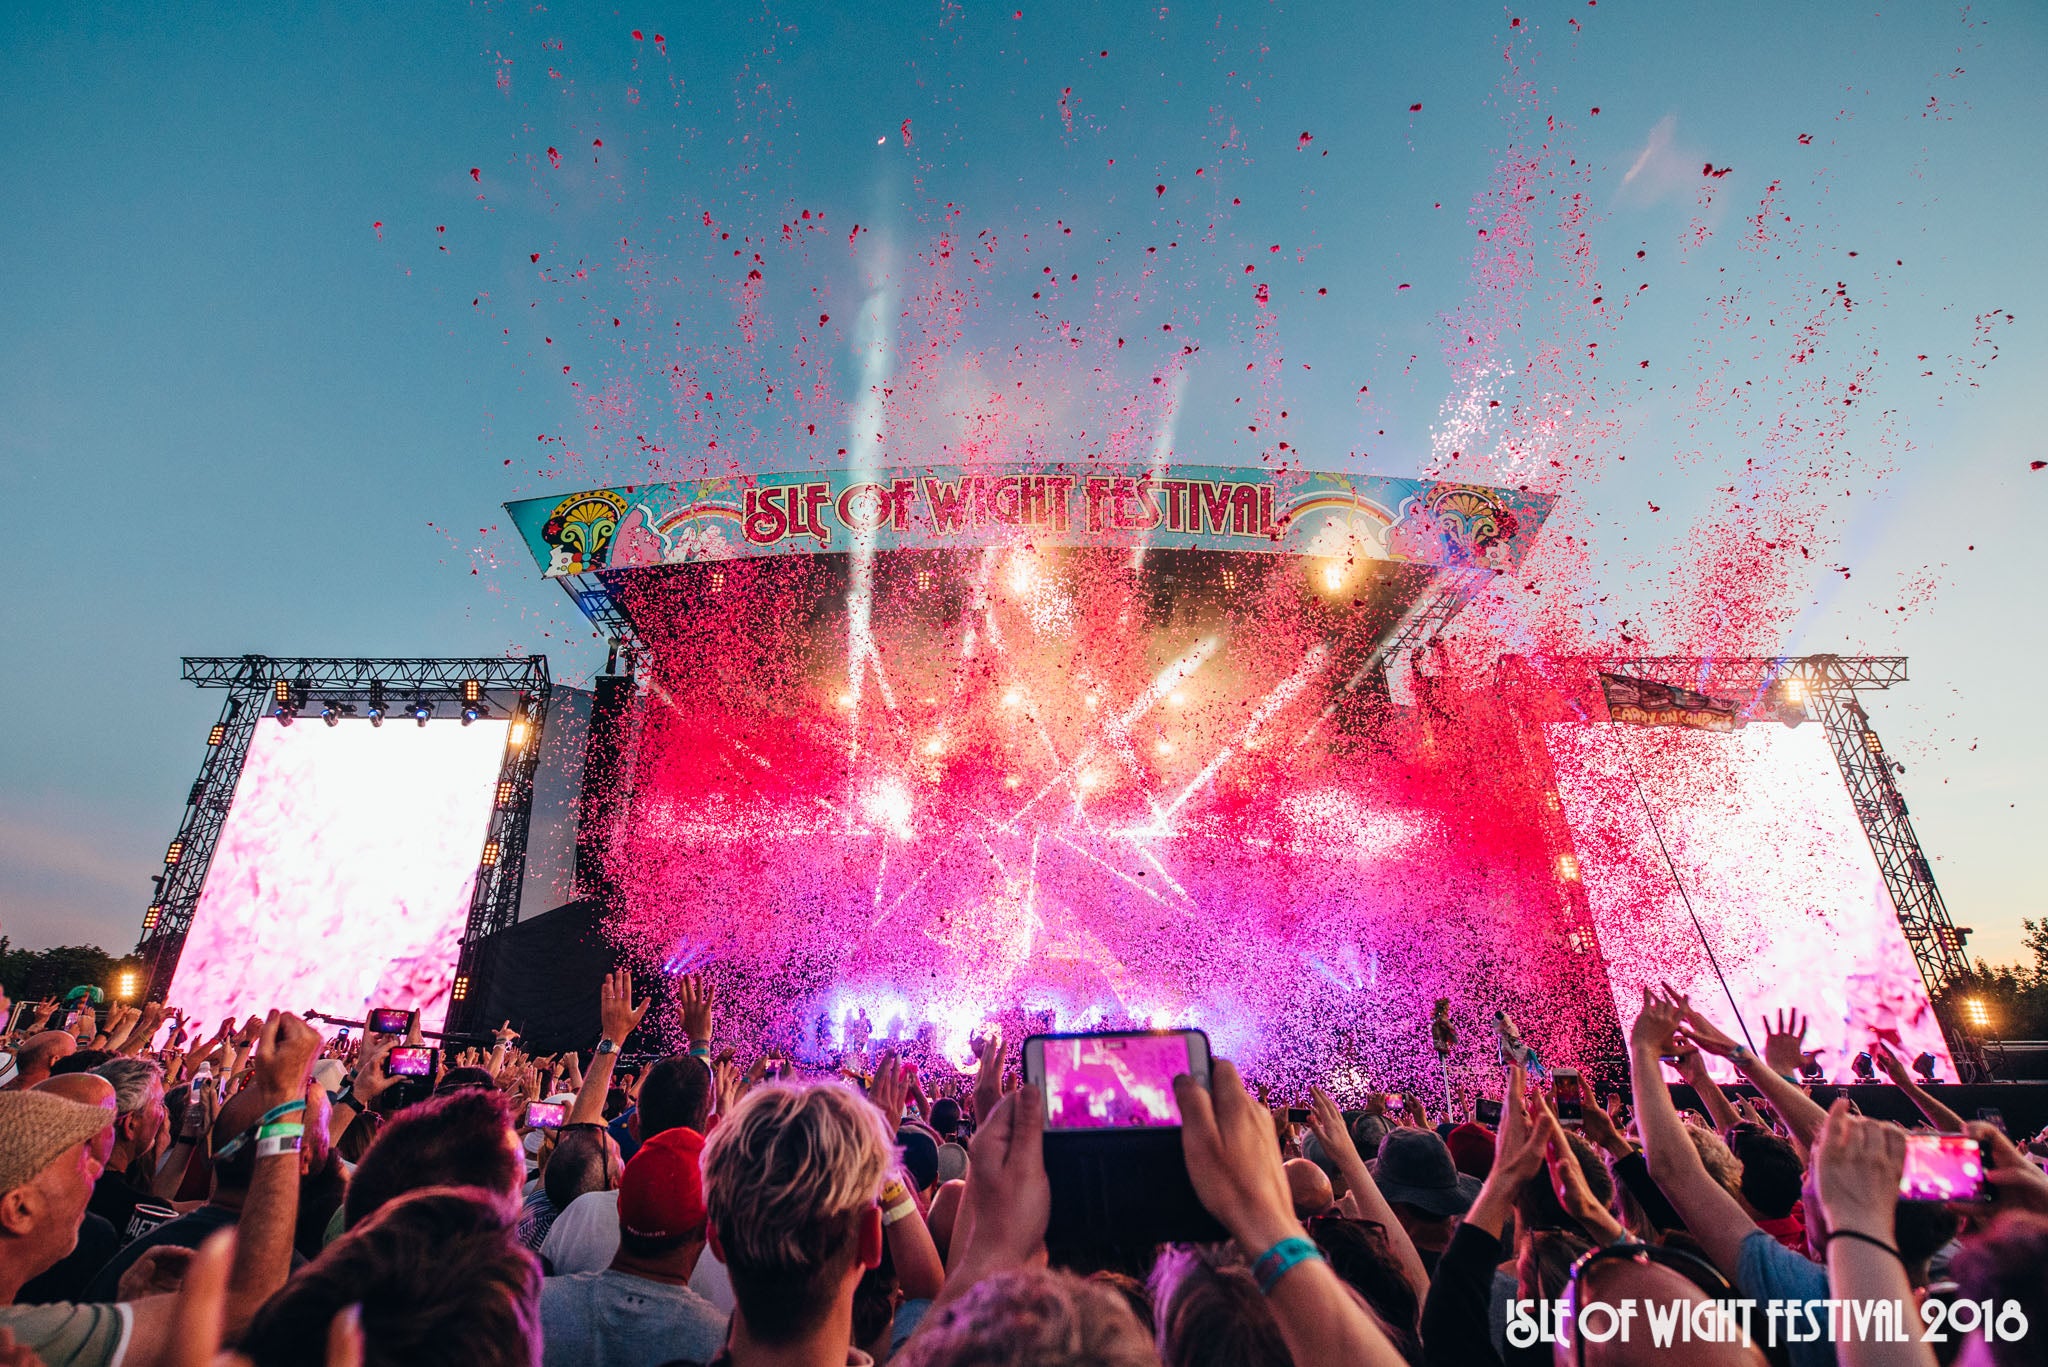 The Isle of Wight Festival was attended by around 50,000 people this year